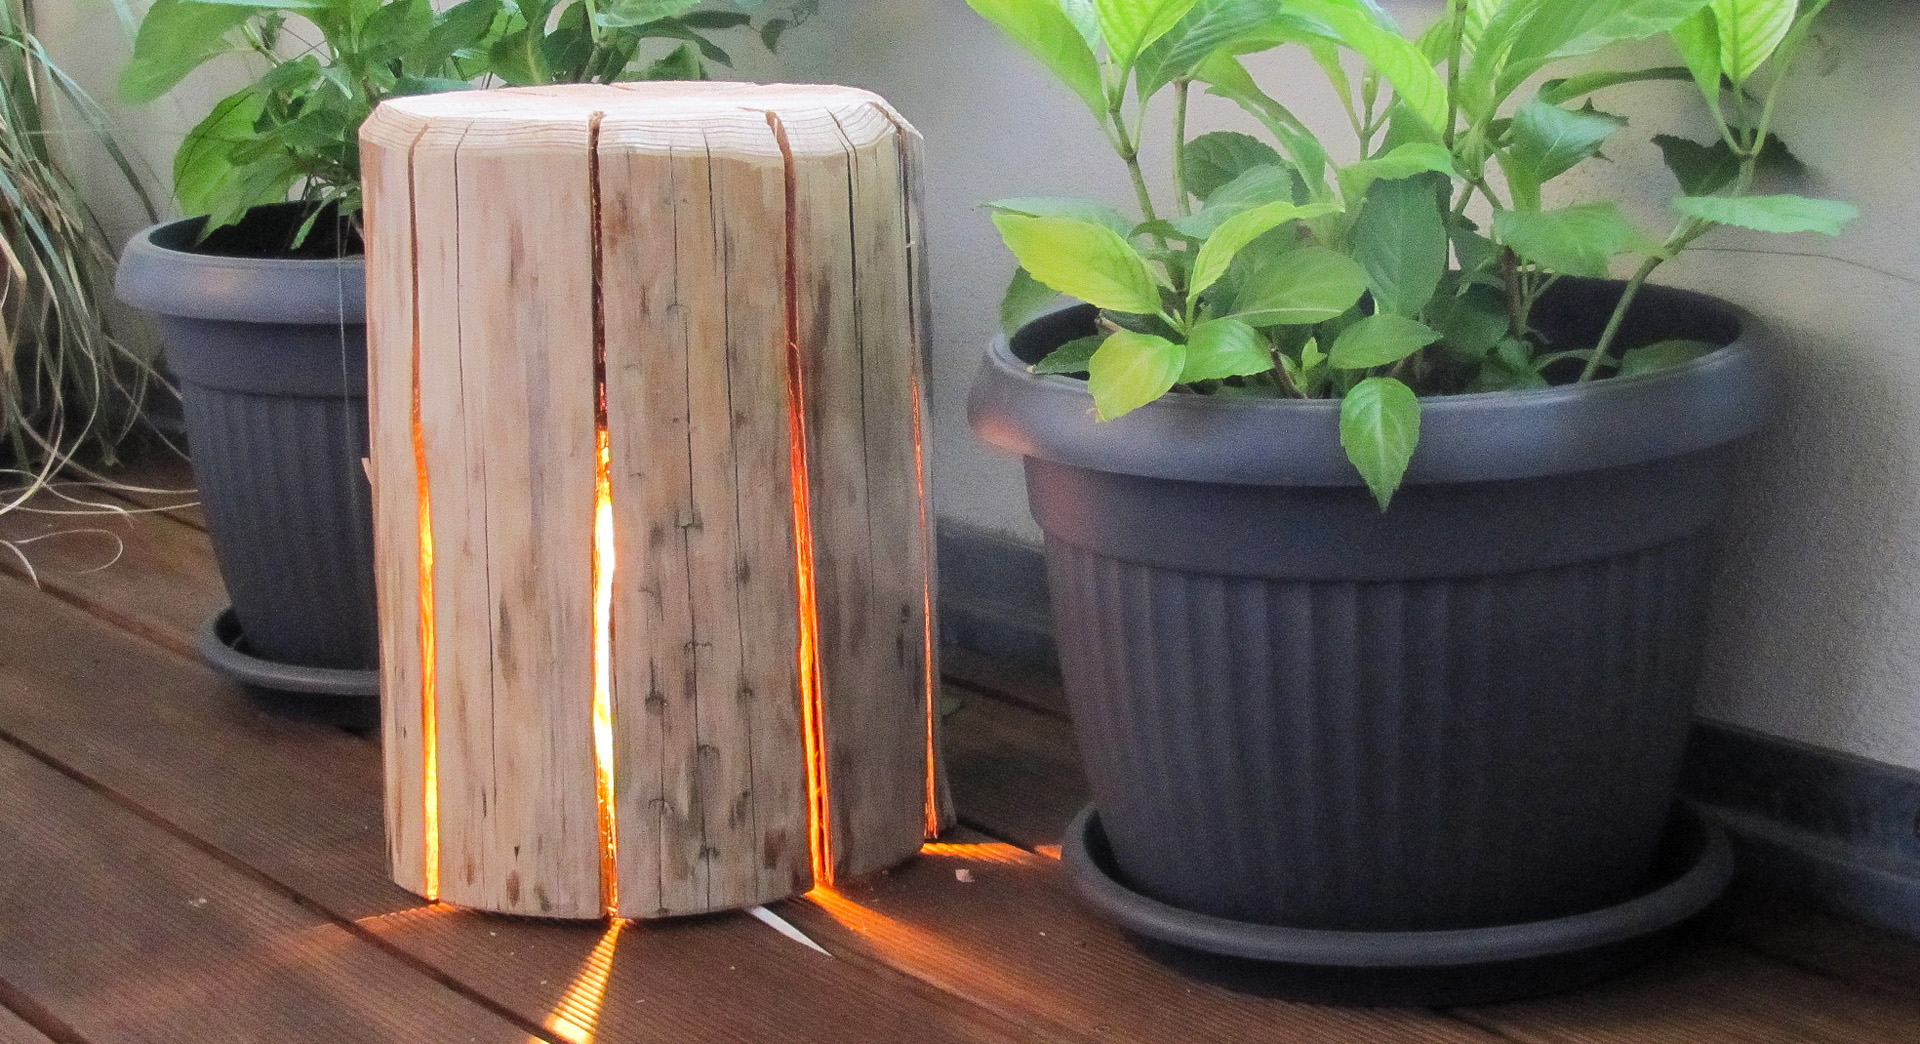 A DIY cracked log lamp with slits for the light to shine through